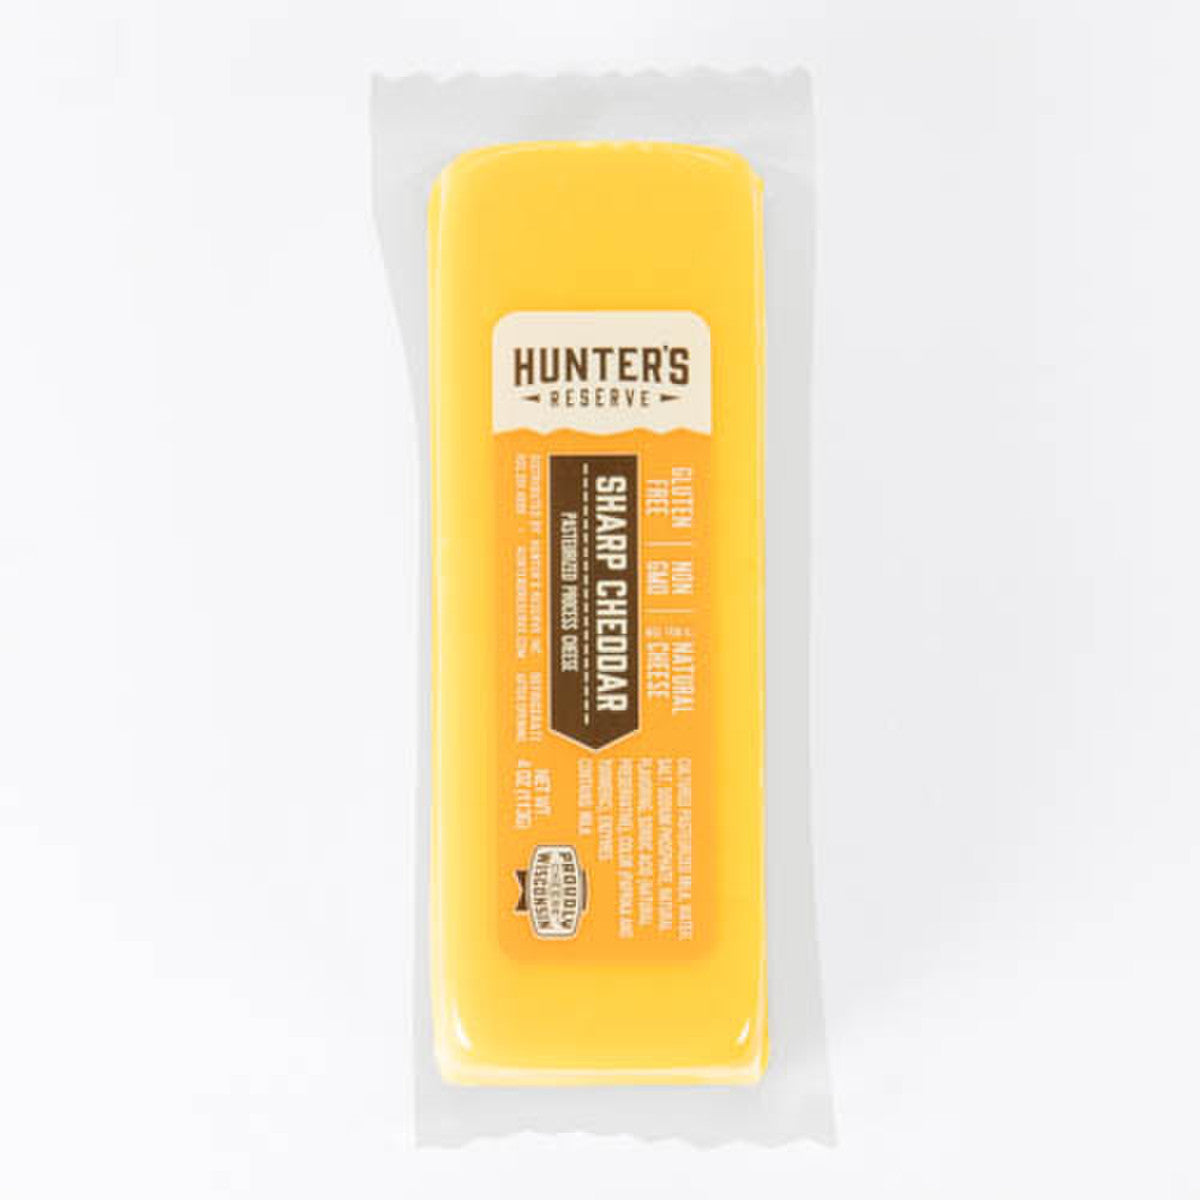 Hunter's Reserve Shelf Stable Cheese